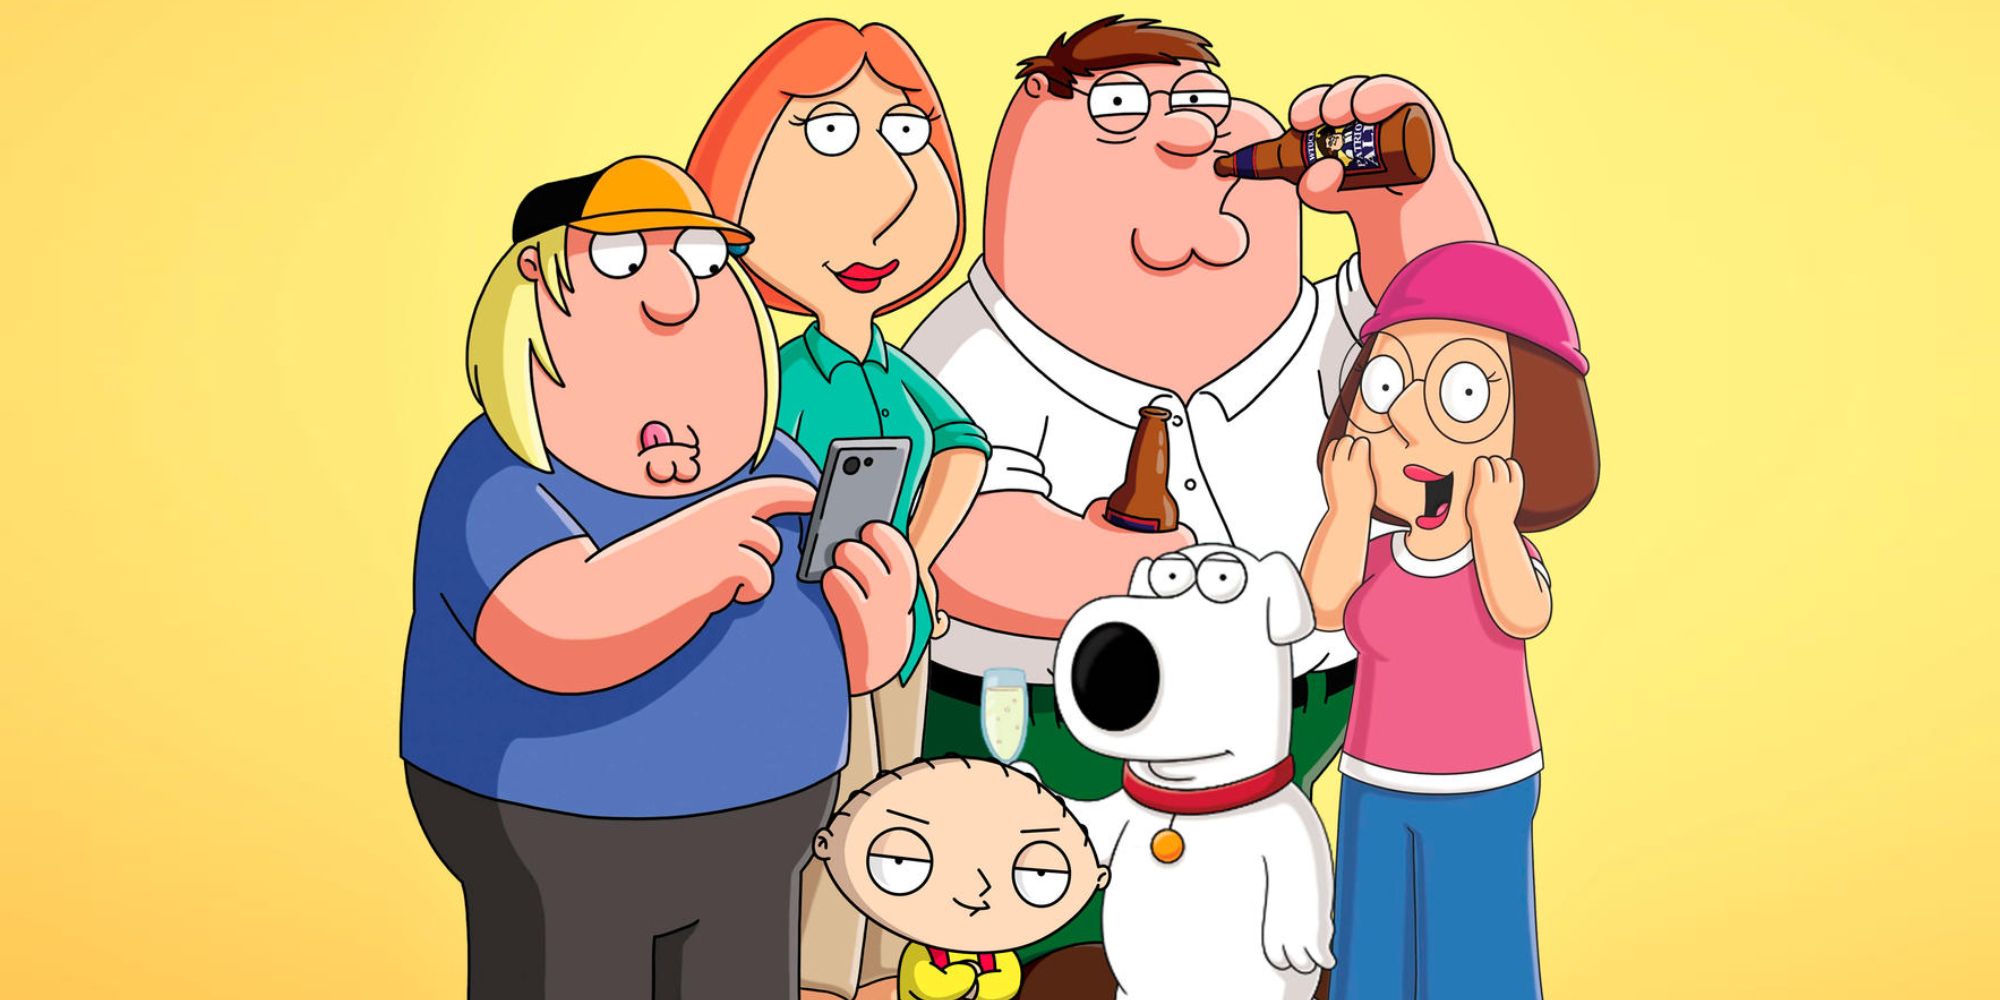 Family Guy Characters